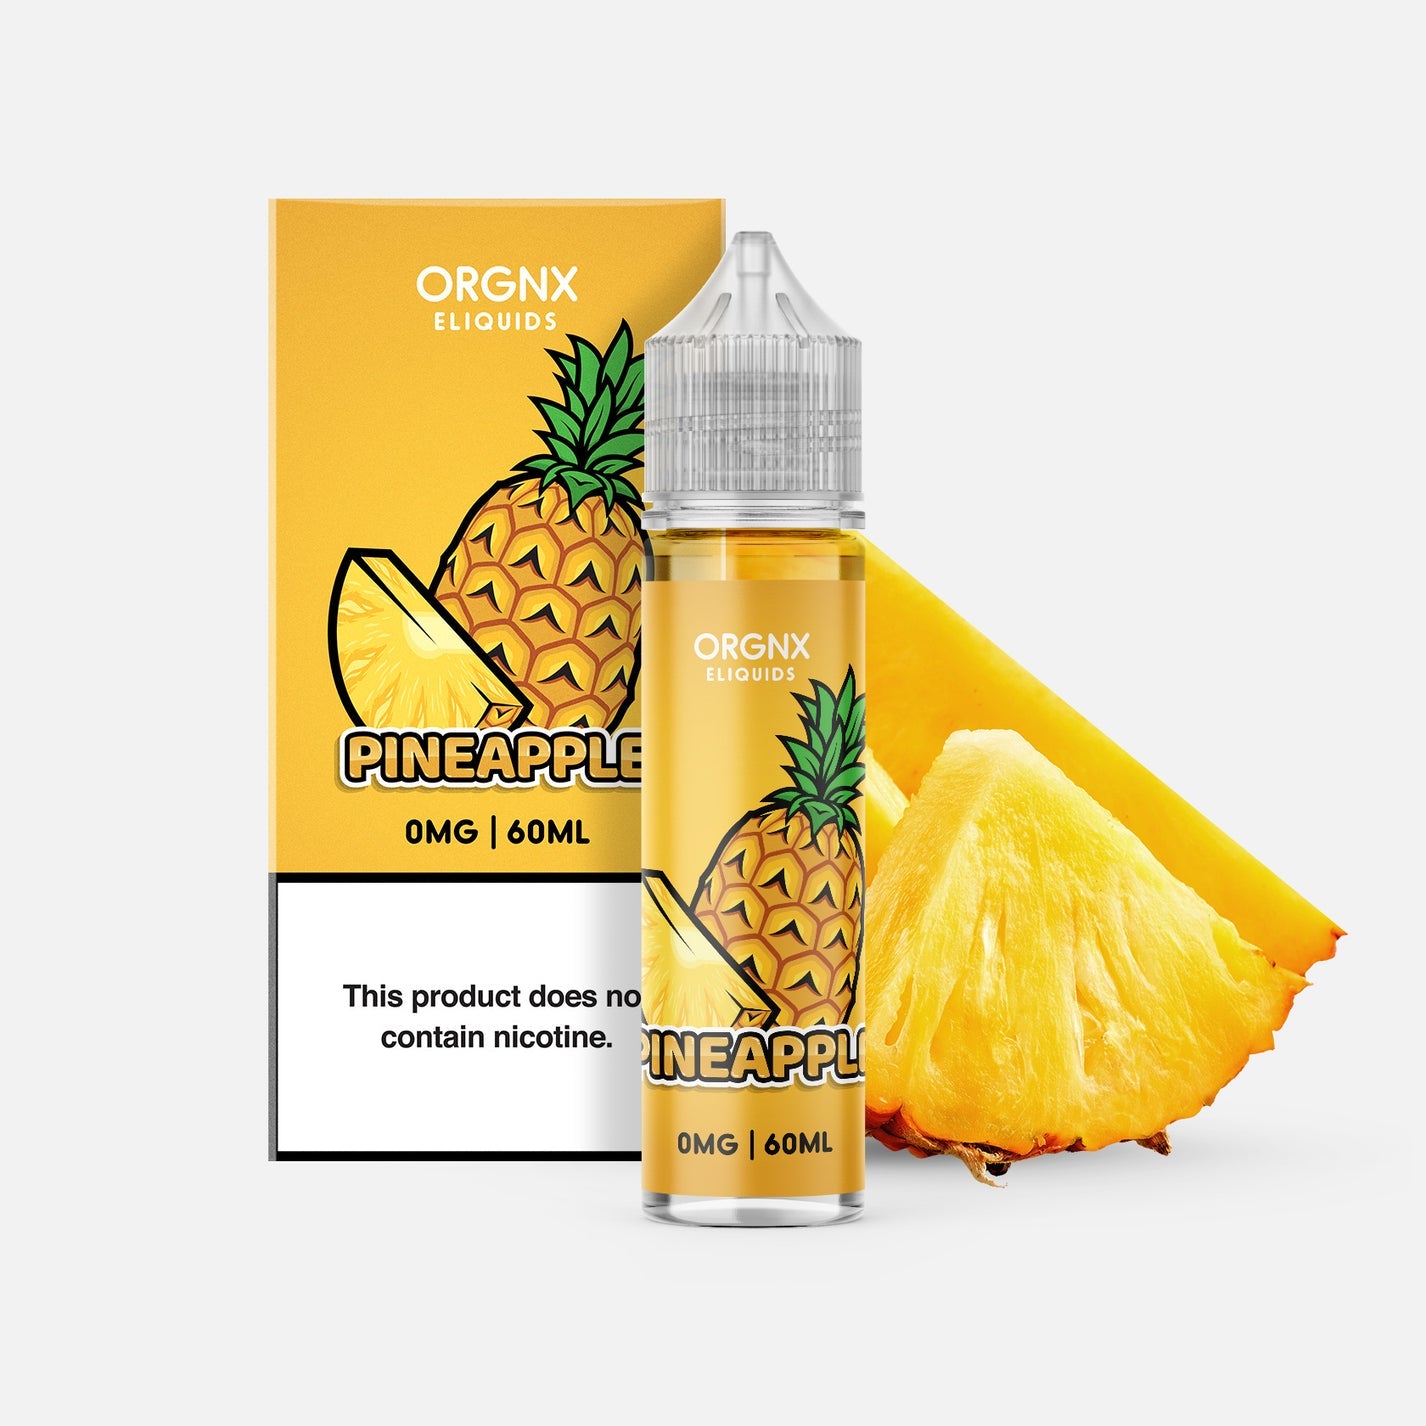 ORGNX: Pineapple